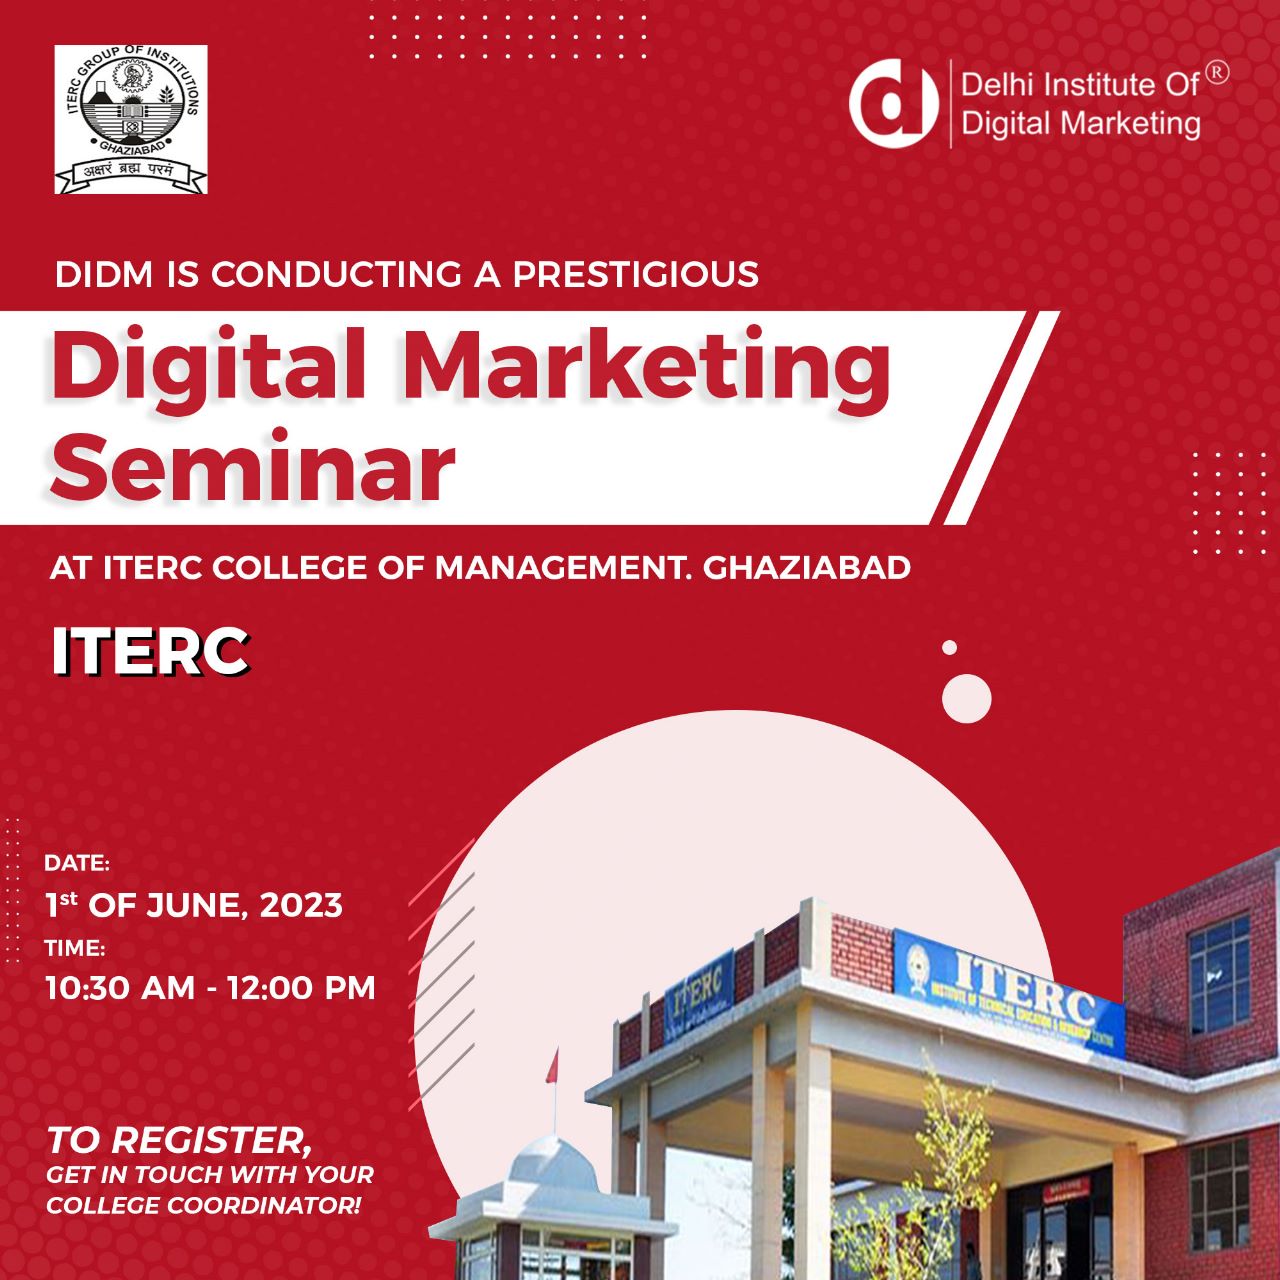 DIDM will conduct a digital marketing seminar at the ITERC College of Management, Ghaziabad